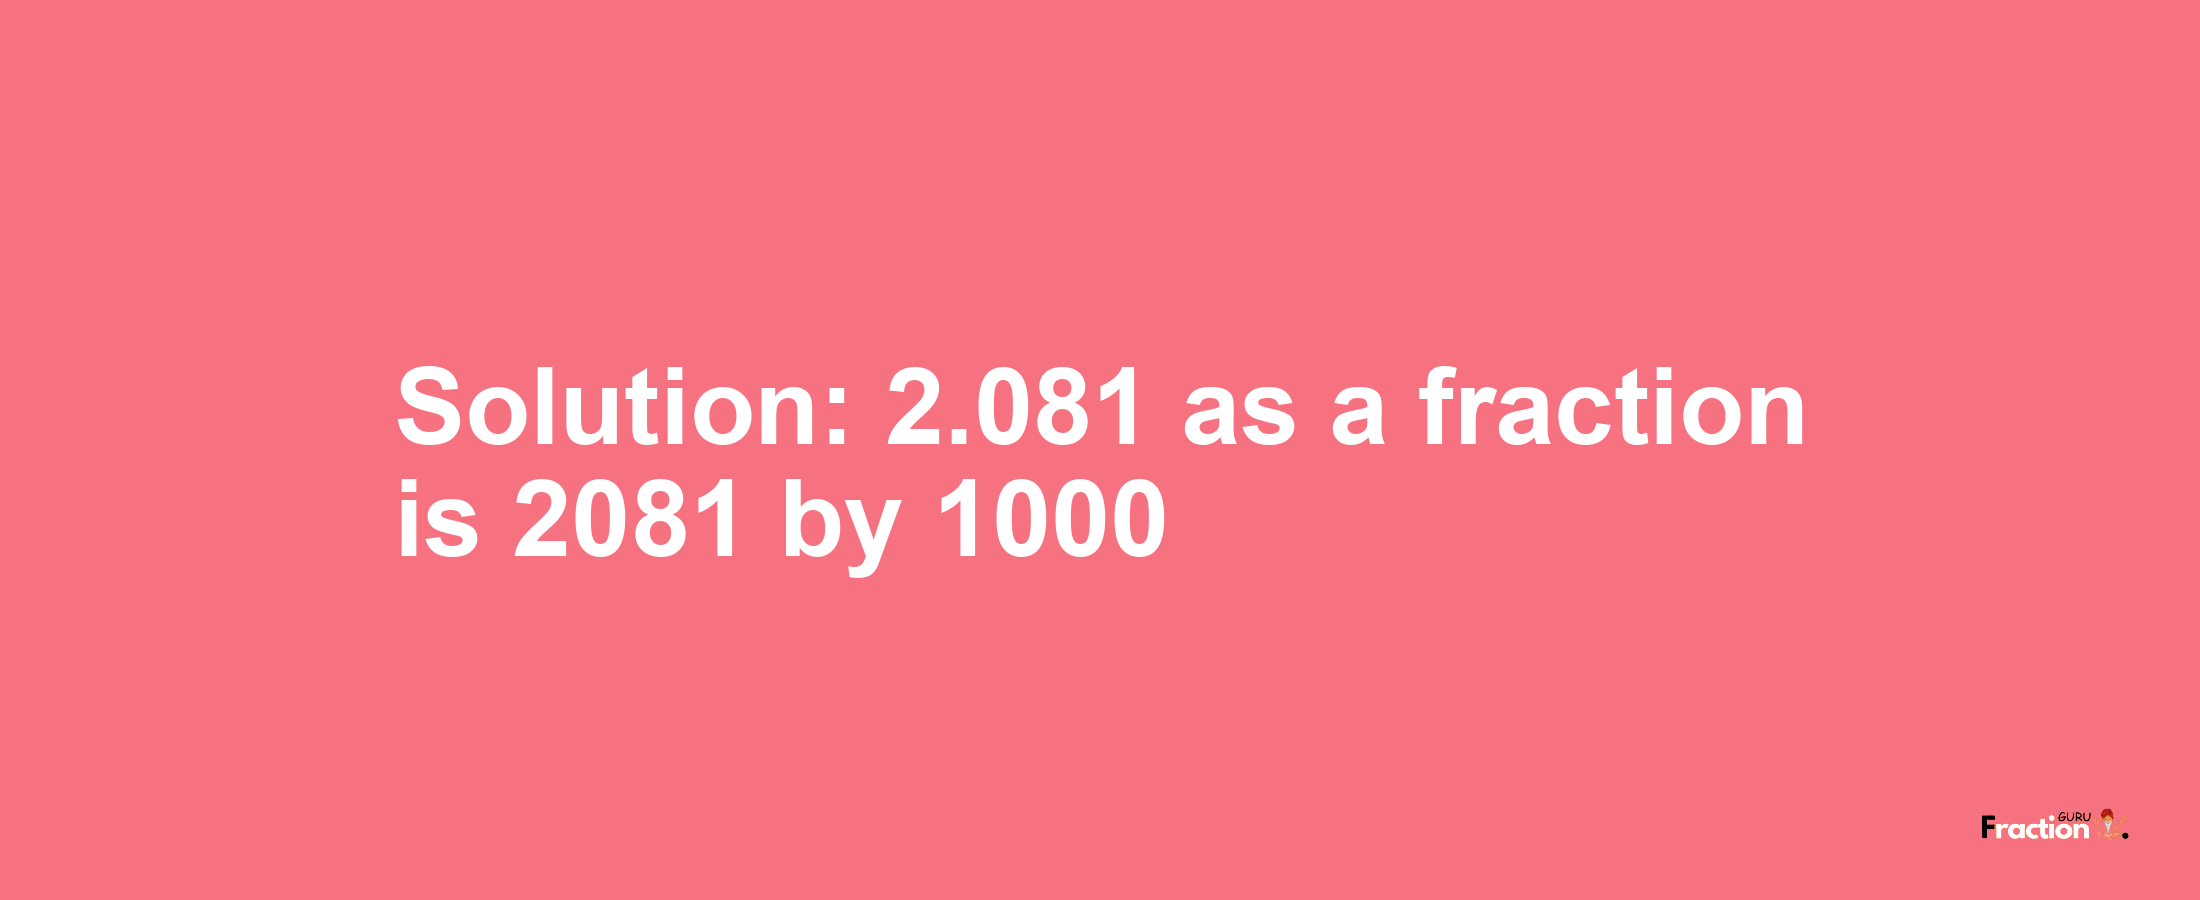 Solution:2.081 as a fraction is 2081/1000